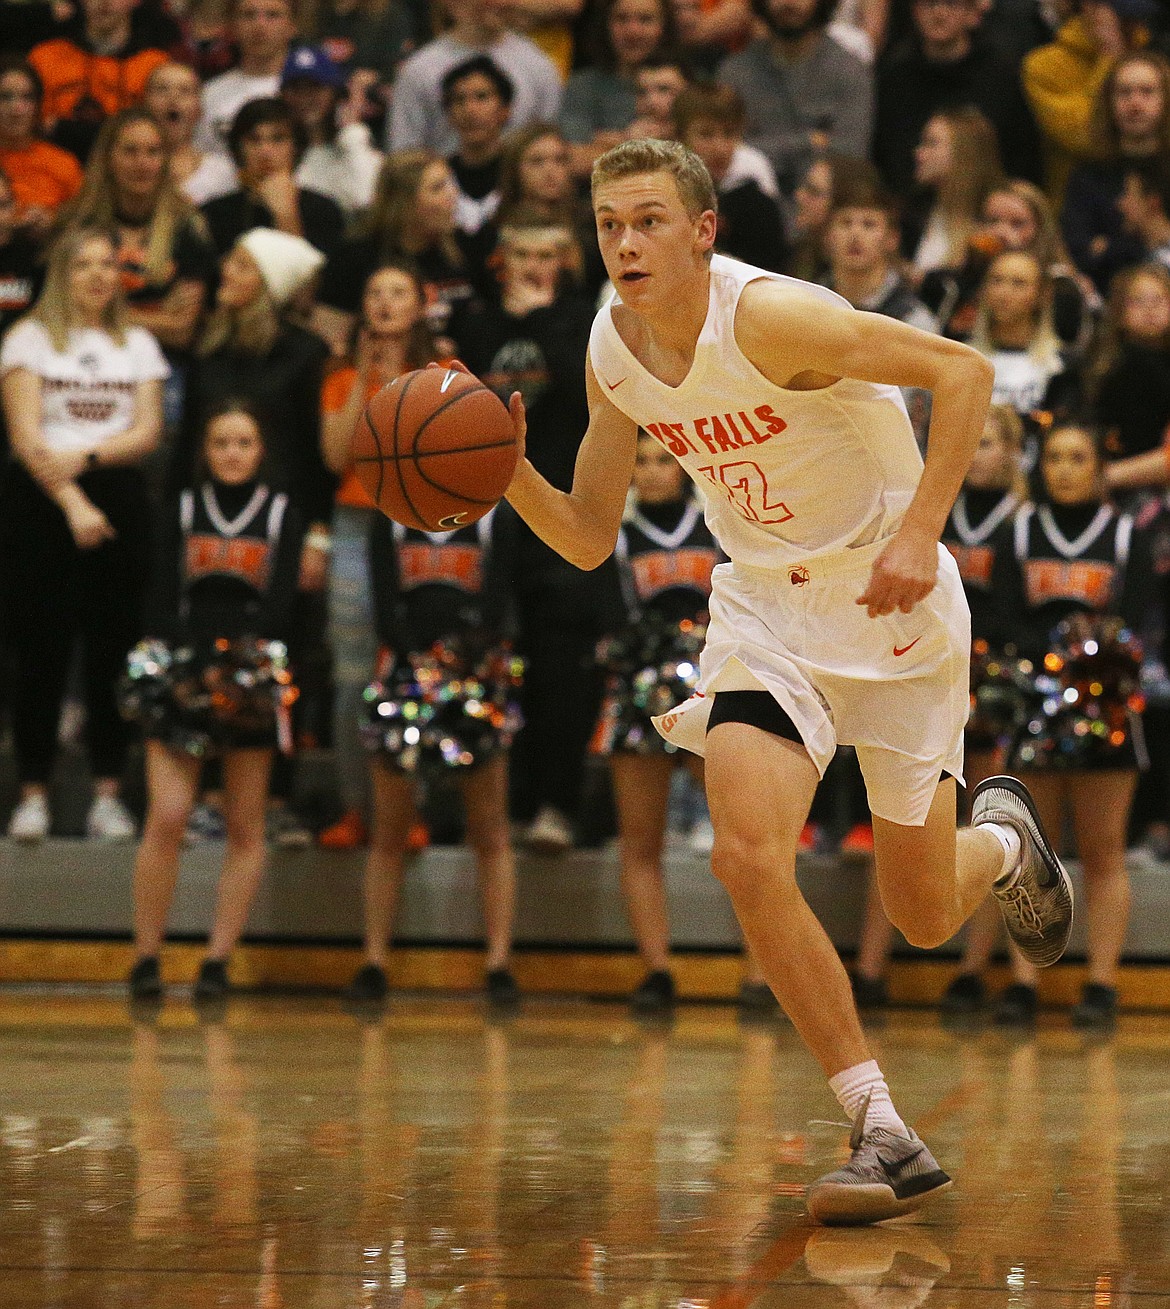 Post Falls guard Isaac Ballew dribbles the ball down the court against Rogers Friday night at Post Falls High School. (LOREN BENOIT/Press)